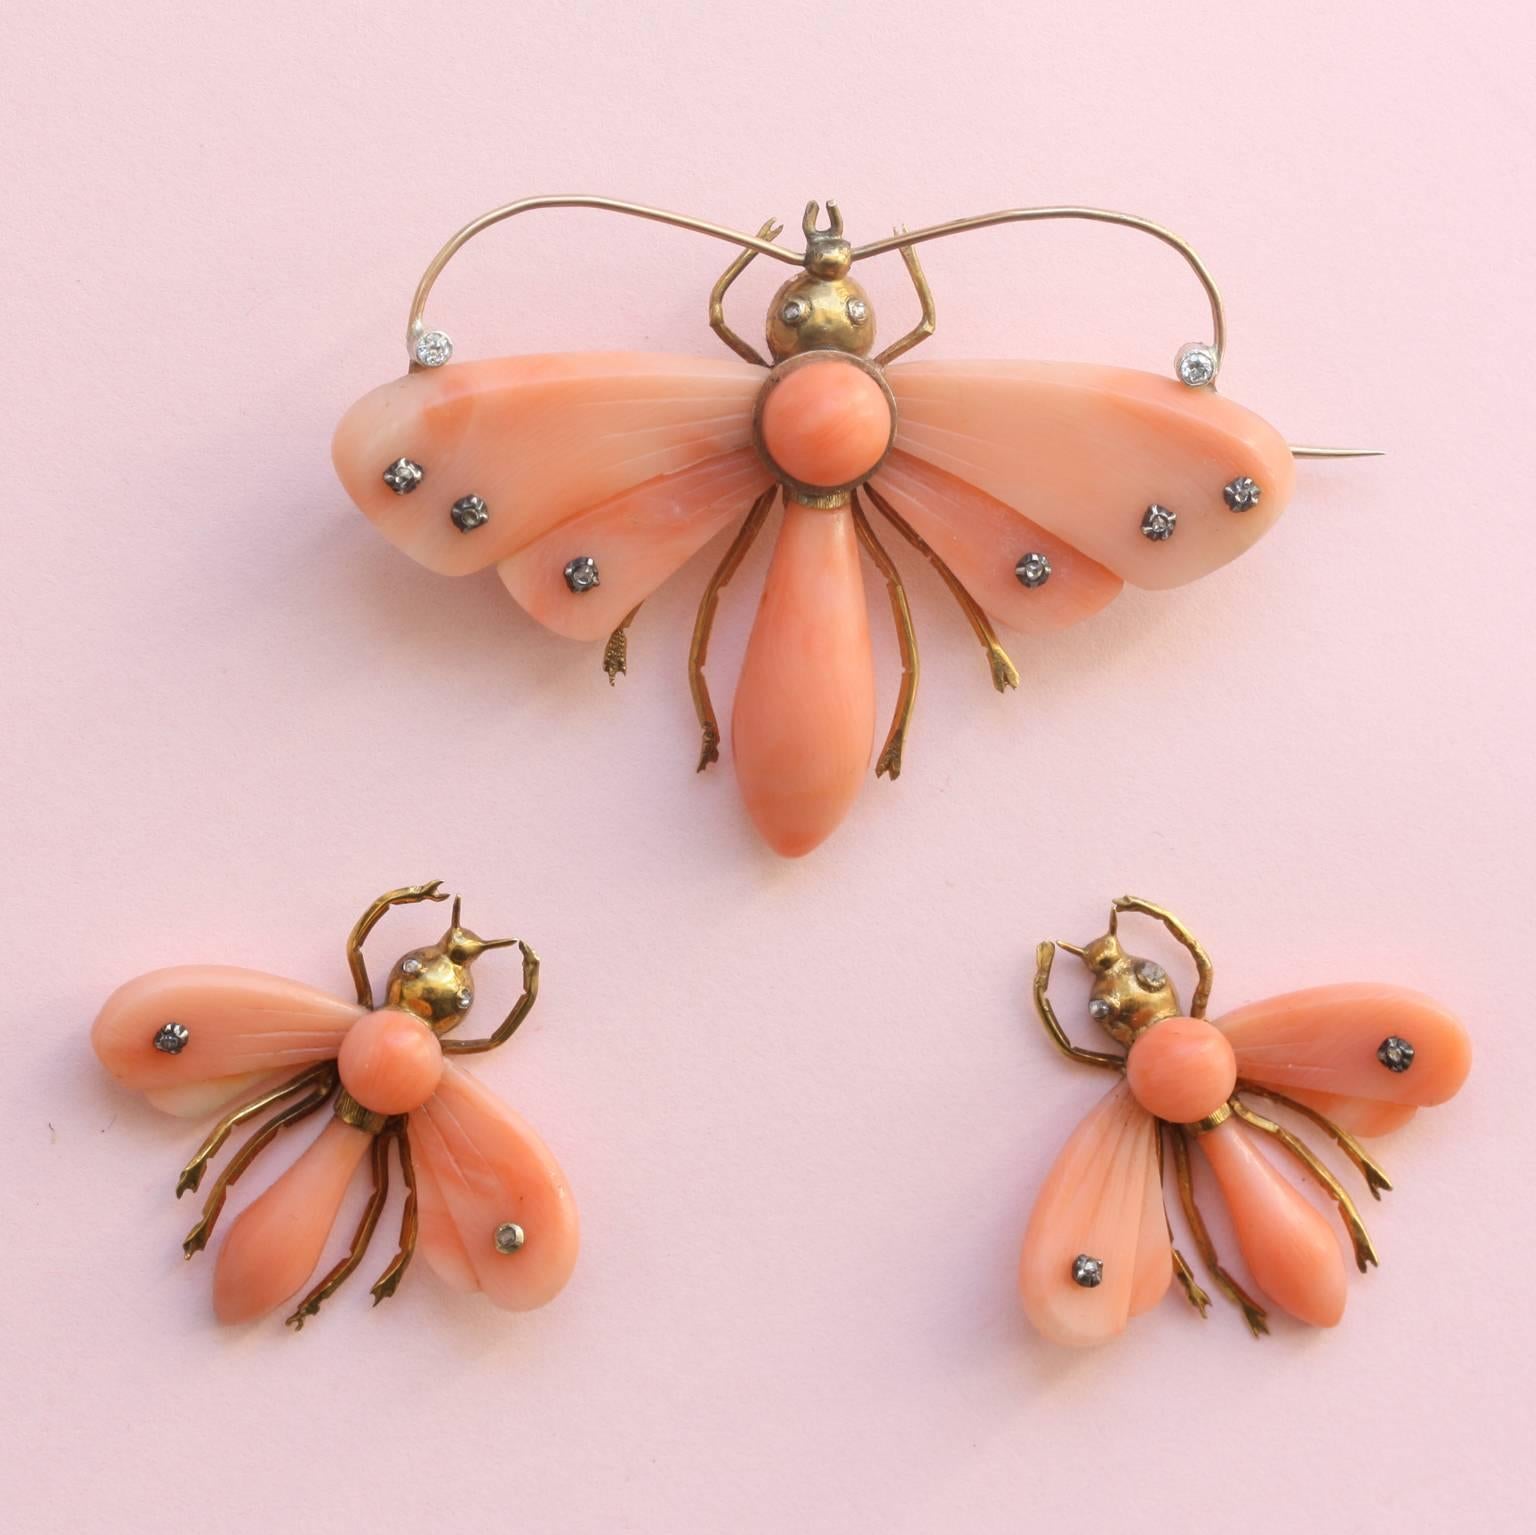 A whimsical Victorian demi-parure suite consisting of a pair of earrings and a brooch in a fitted case. Coral, gold and rose- cut diamonds, 19th century.

weight brooch: 7.3 grams
weight earrings: 5.3 grams
dimensions brooch: 5 x 3.5
dimensions